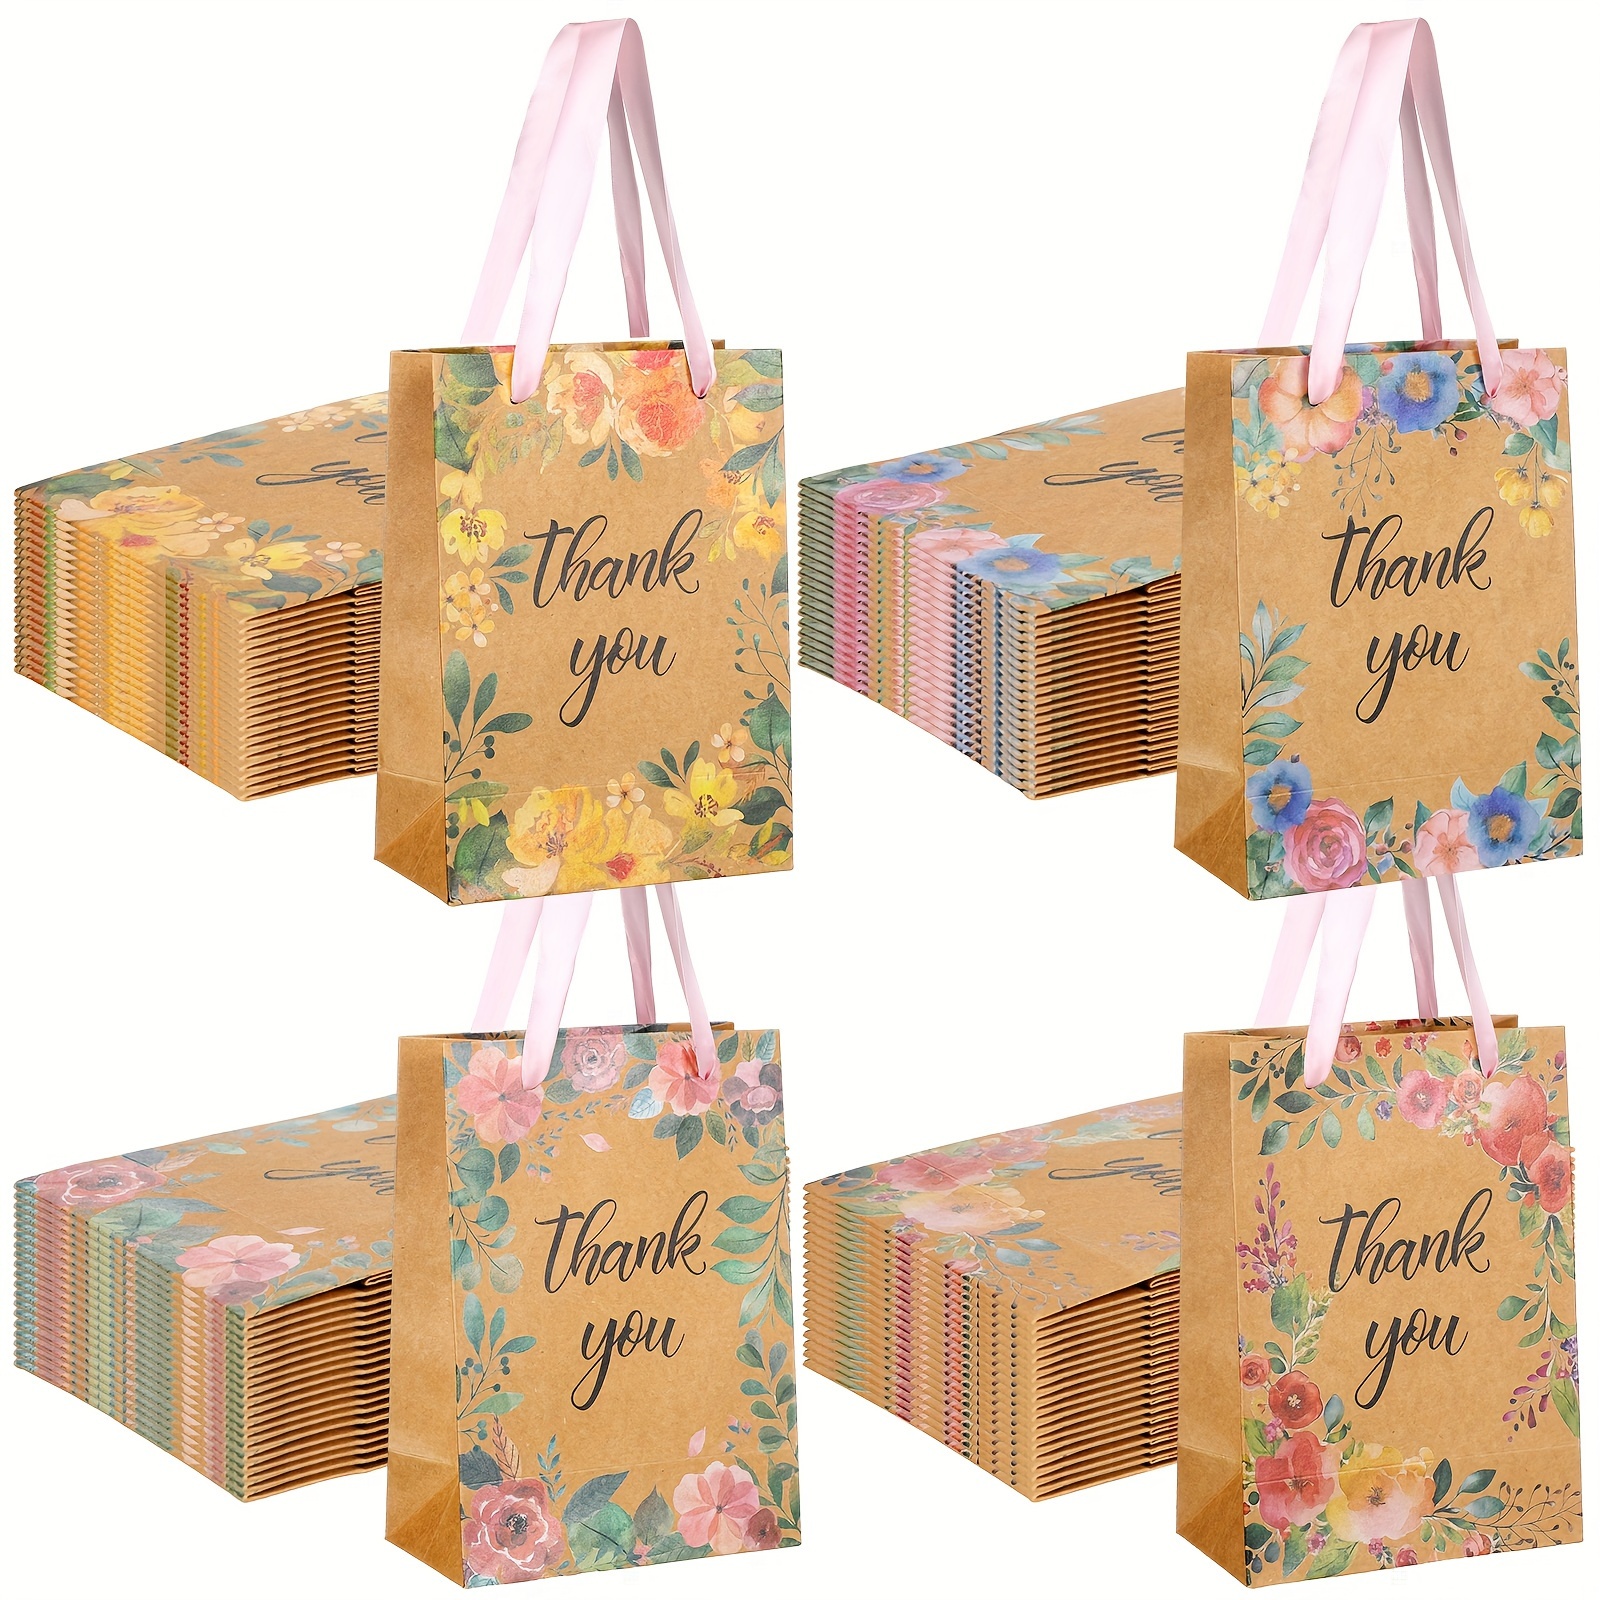 50/100pcs Brown Kraft Paper Bags With Handles, 5.9x3.2x8.3 Inch Small Plain  Gift